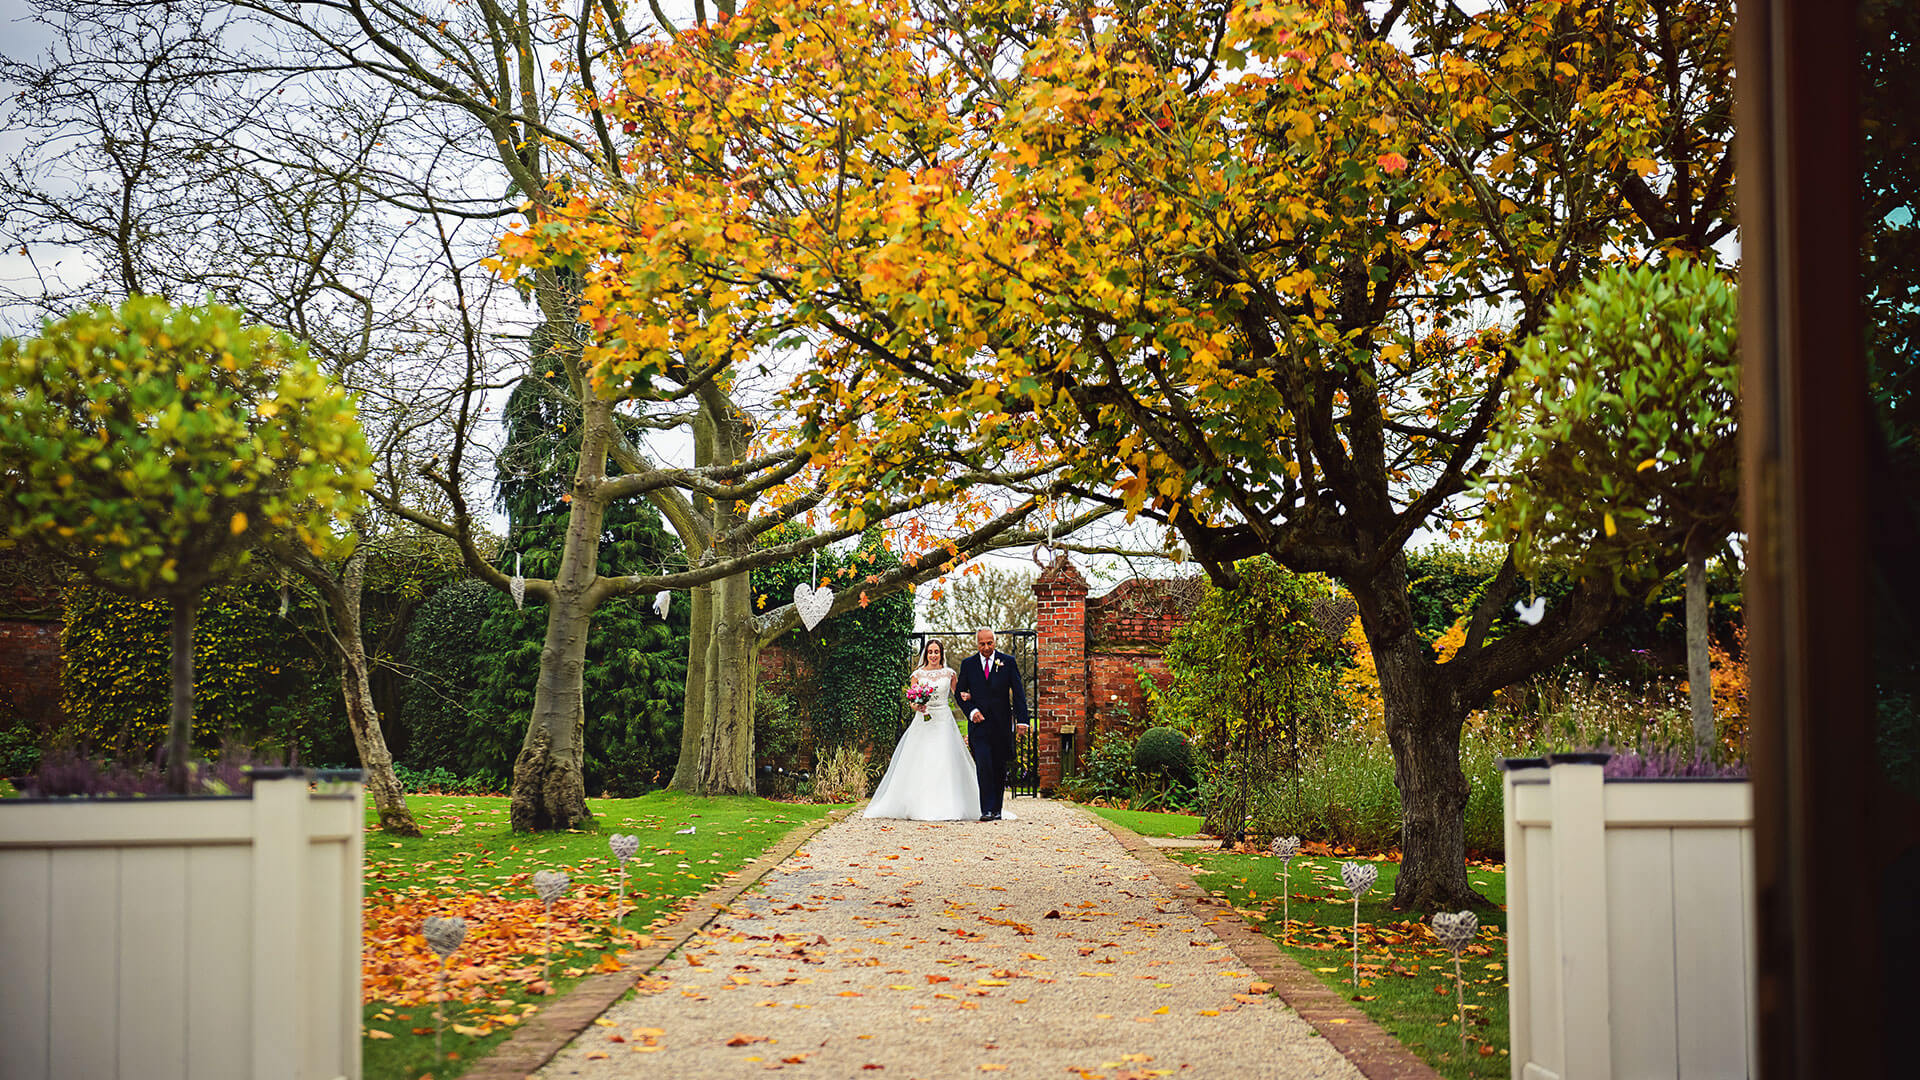 The gardens look beautiful in autumn as the leaves turn brown and begin to fall - autumn wedding